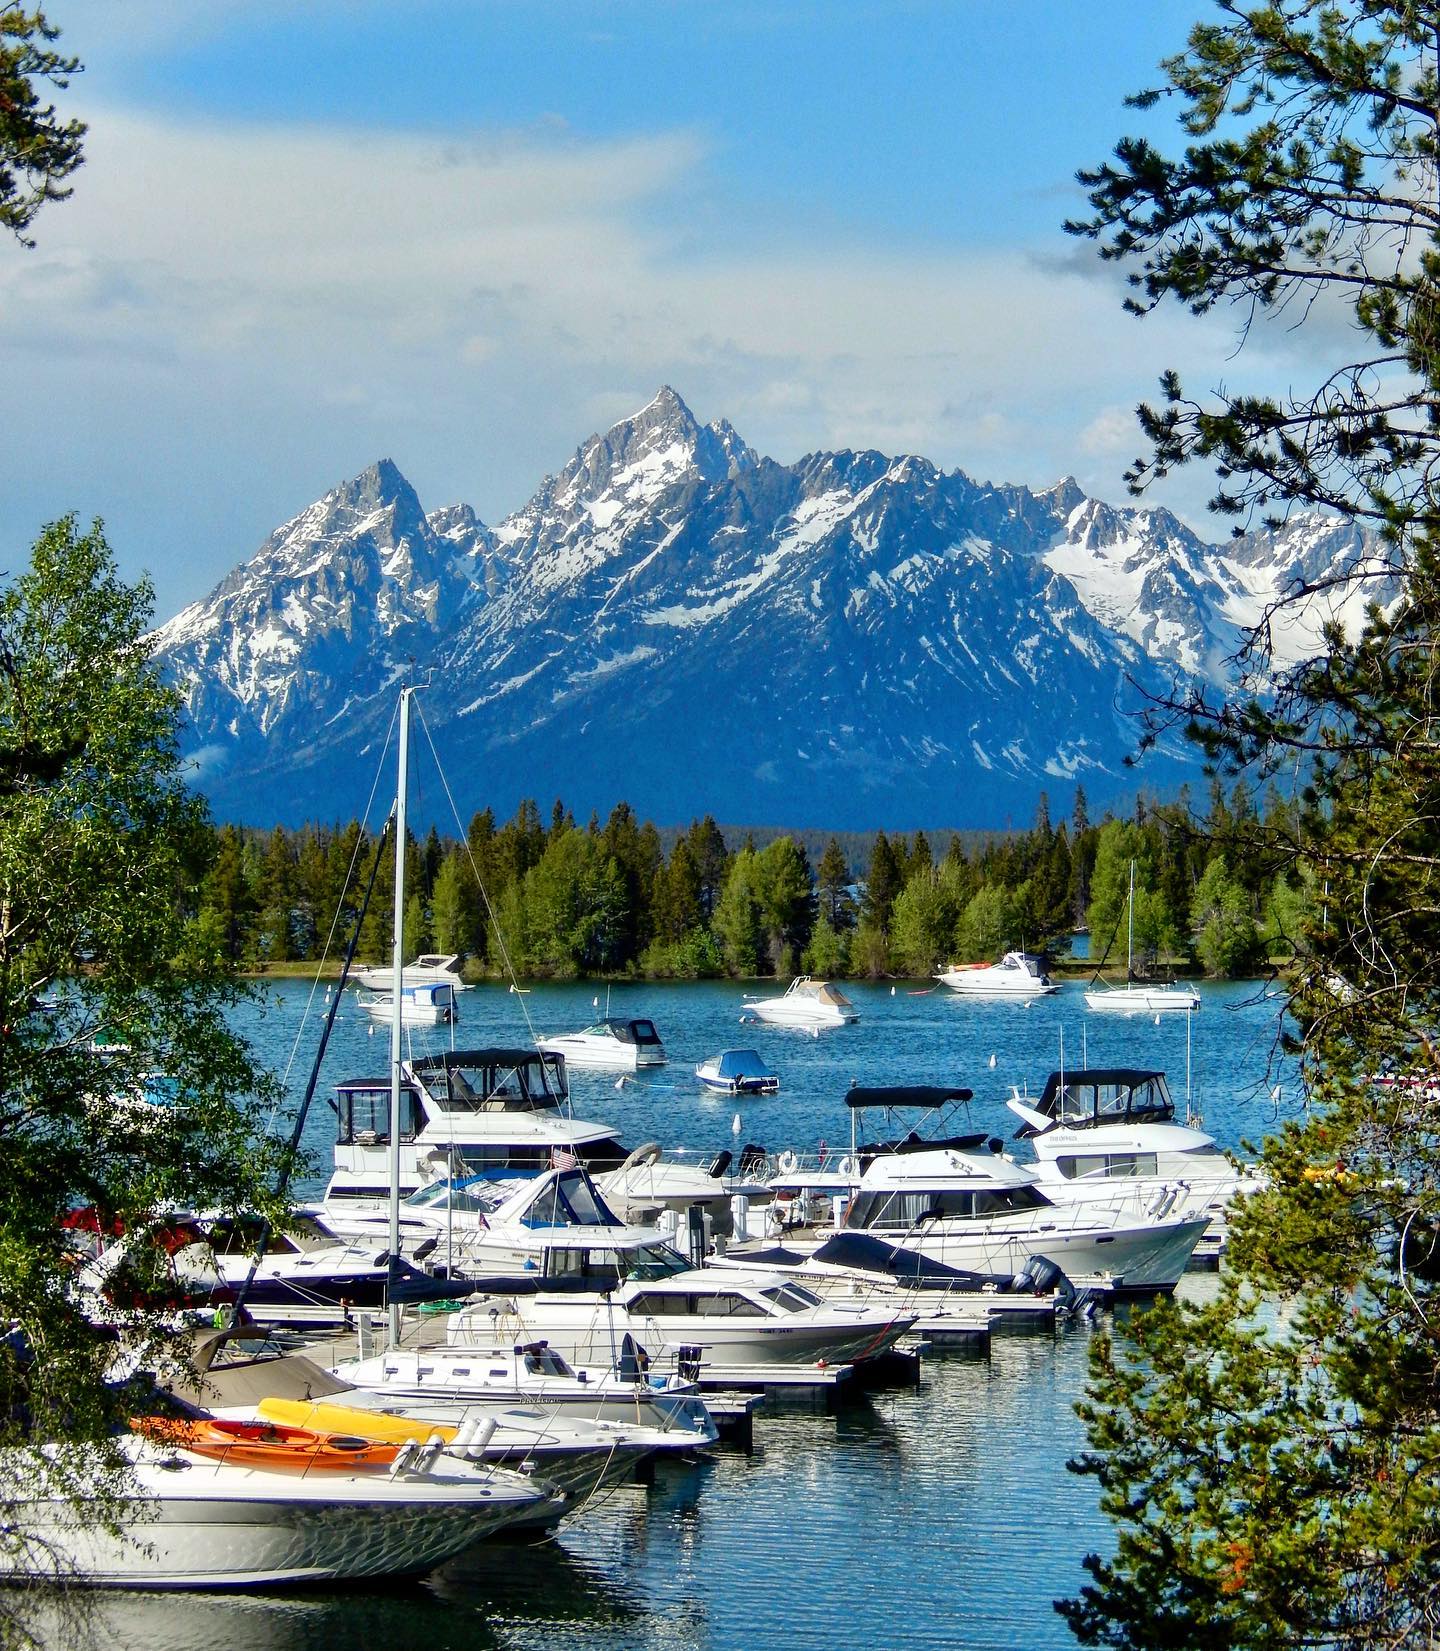 Colter Bay, Grand Teton Nationalpark, Wyoming 
Colter Bay is scenic bliss, located at Northeast side of Jackson Lake. The view from the marina is amazing. The lake, the mountains...😍
#usatravels #traveltheusa #roadtripusa #travelphotography #travelgram #wyominglife #wyomingphotographer #colterbay #grandtetonnationalpark #nationalparksusa #amazingplaces #amazingview #mountains #postcardpicture #nature #naturelovers #naturephotography #beautifulnature